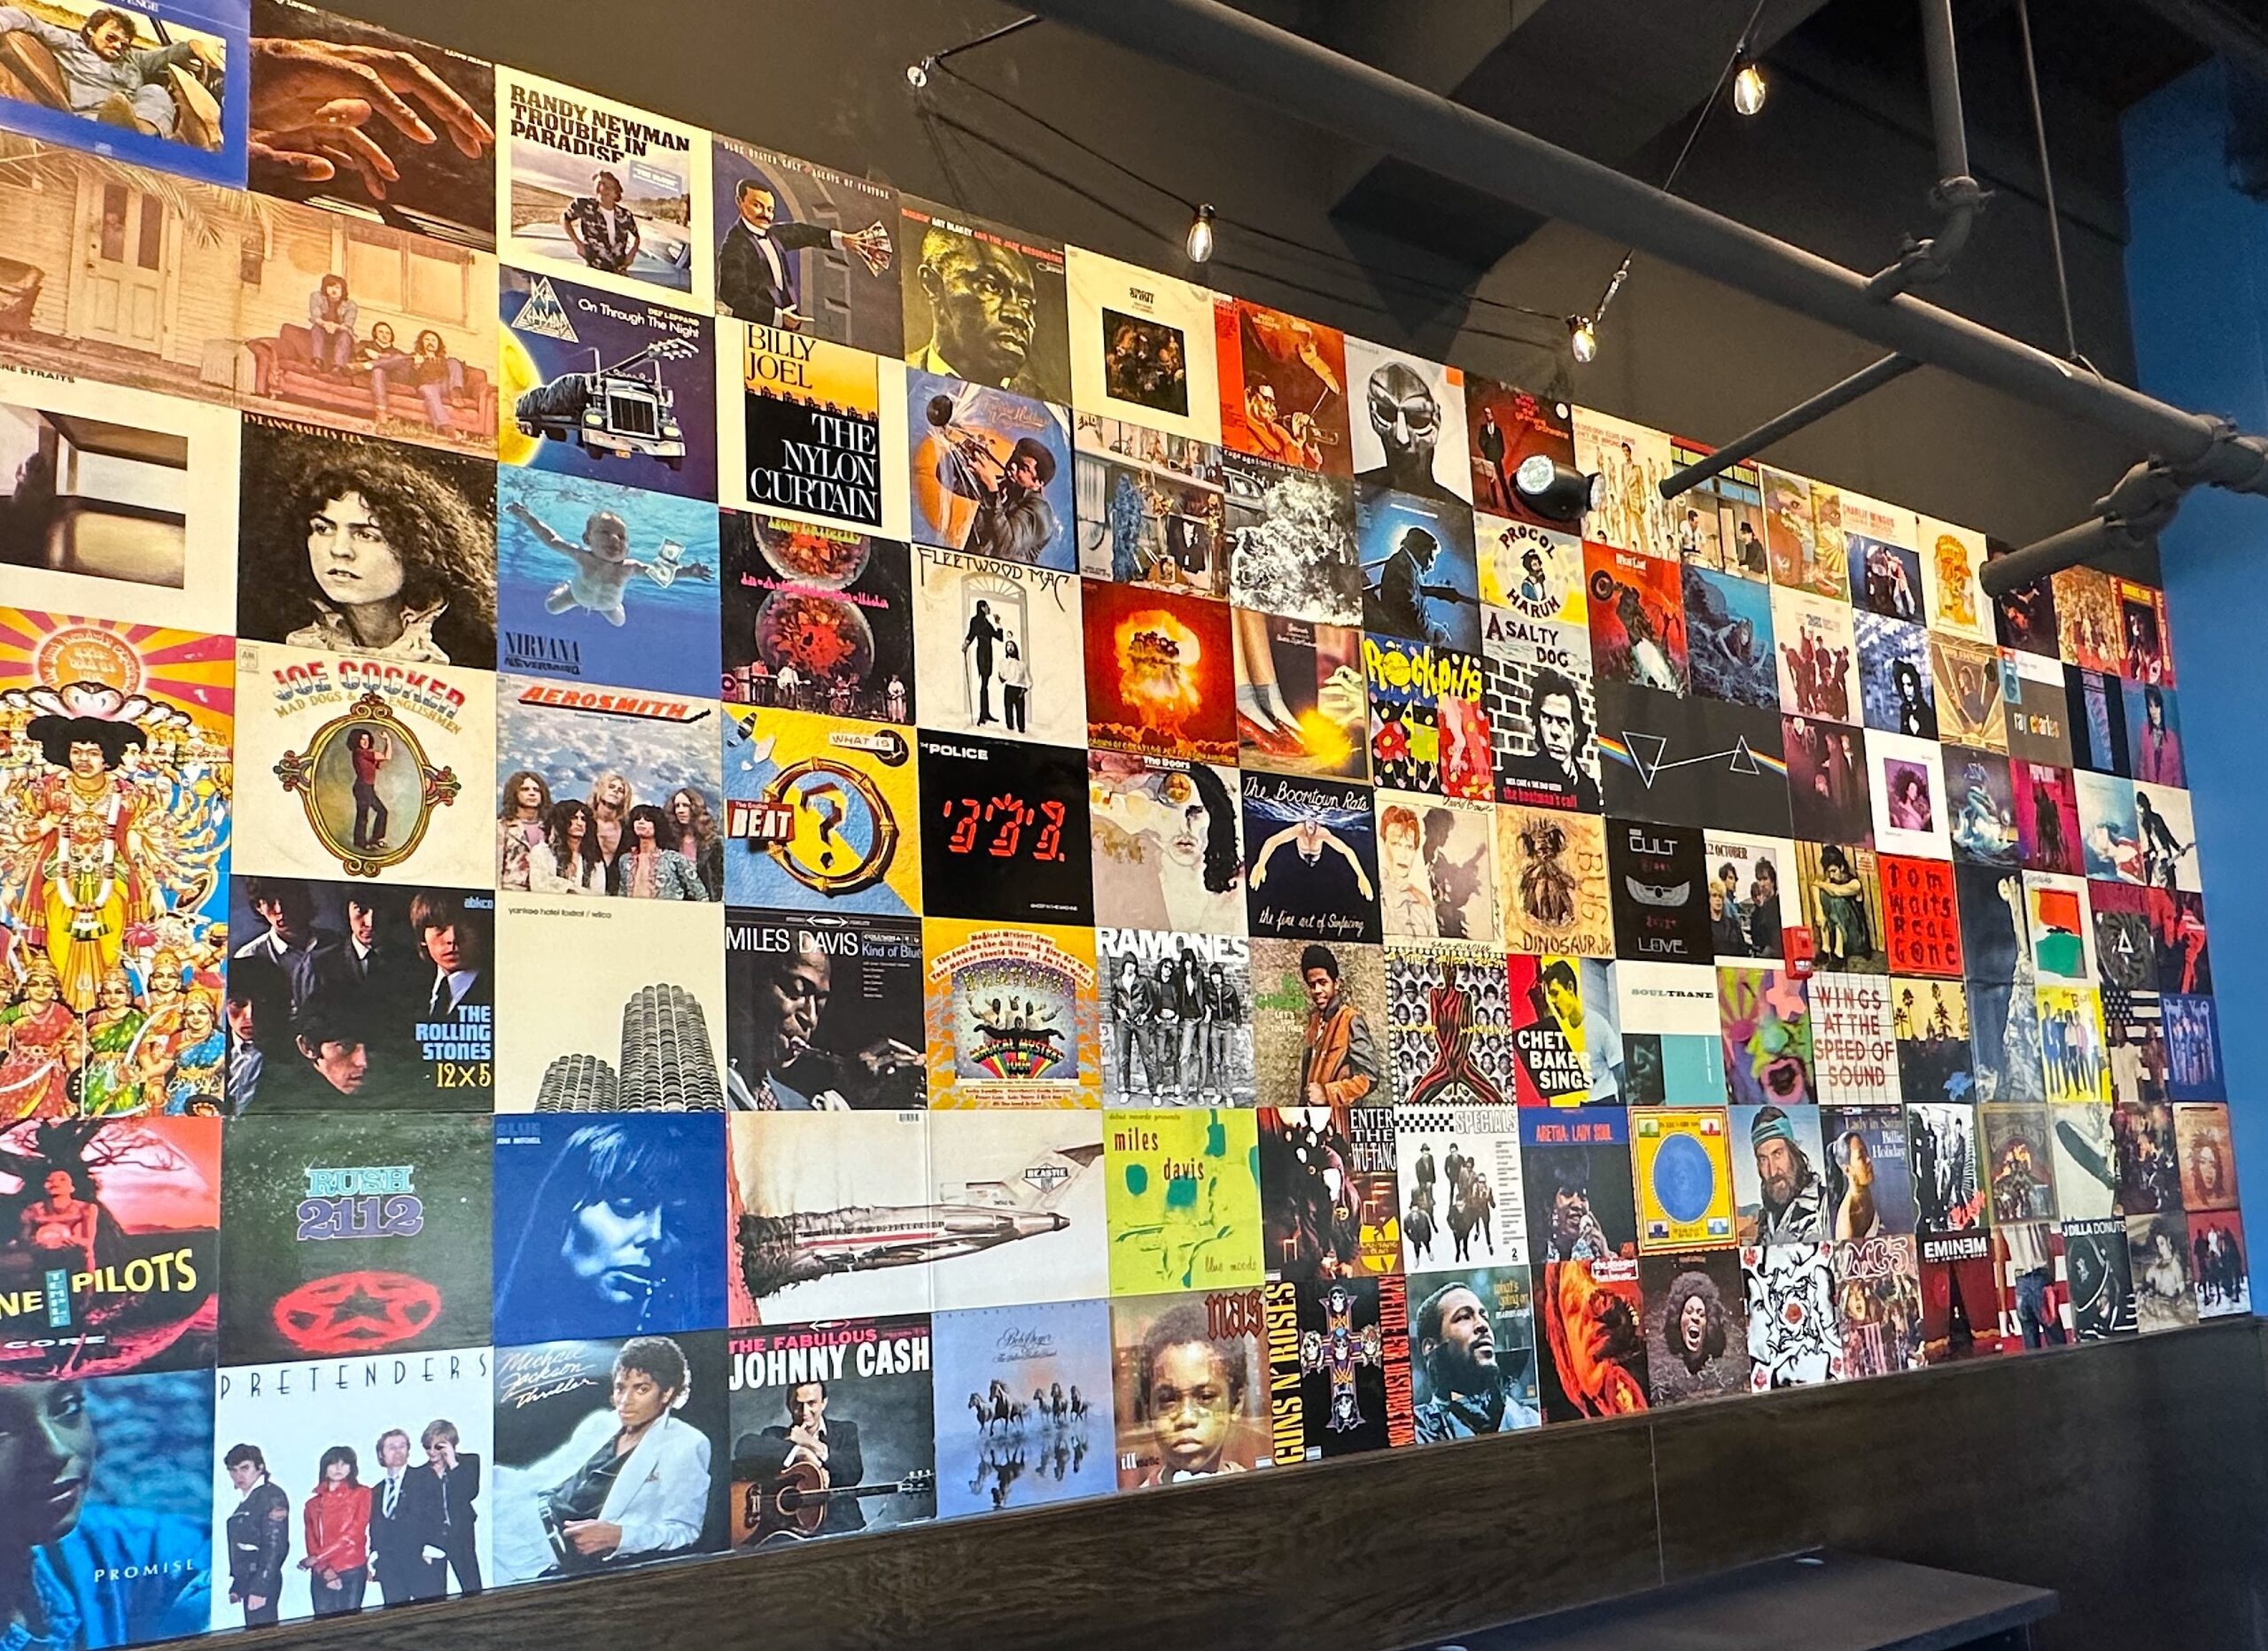 The northeast corner of the restaurant features a mural made up of iconic album covers